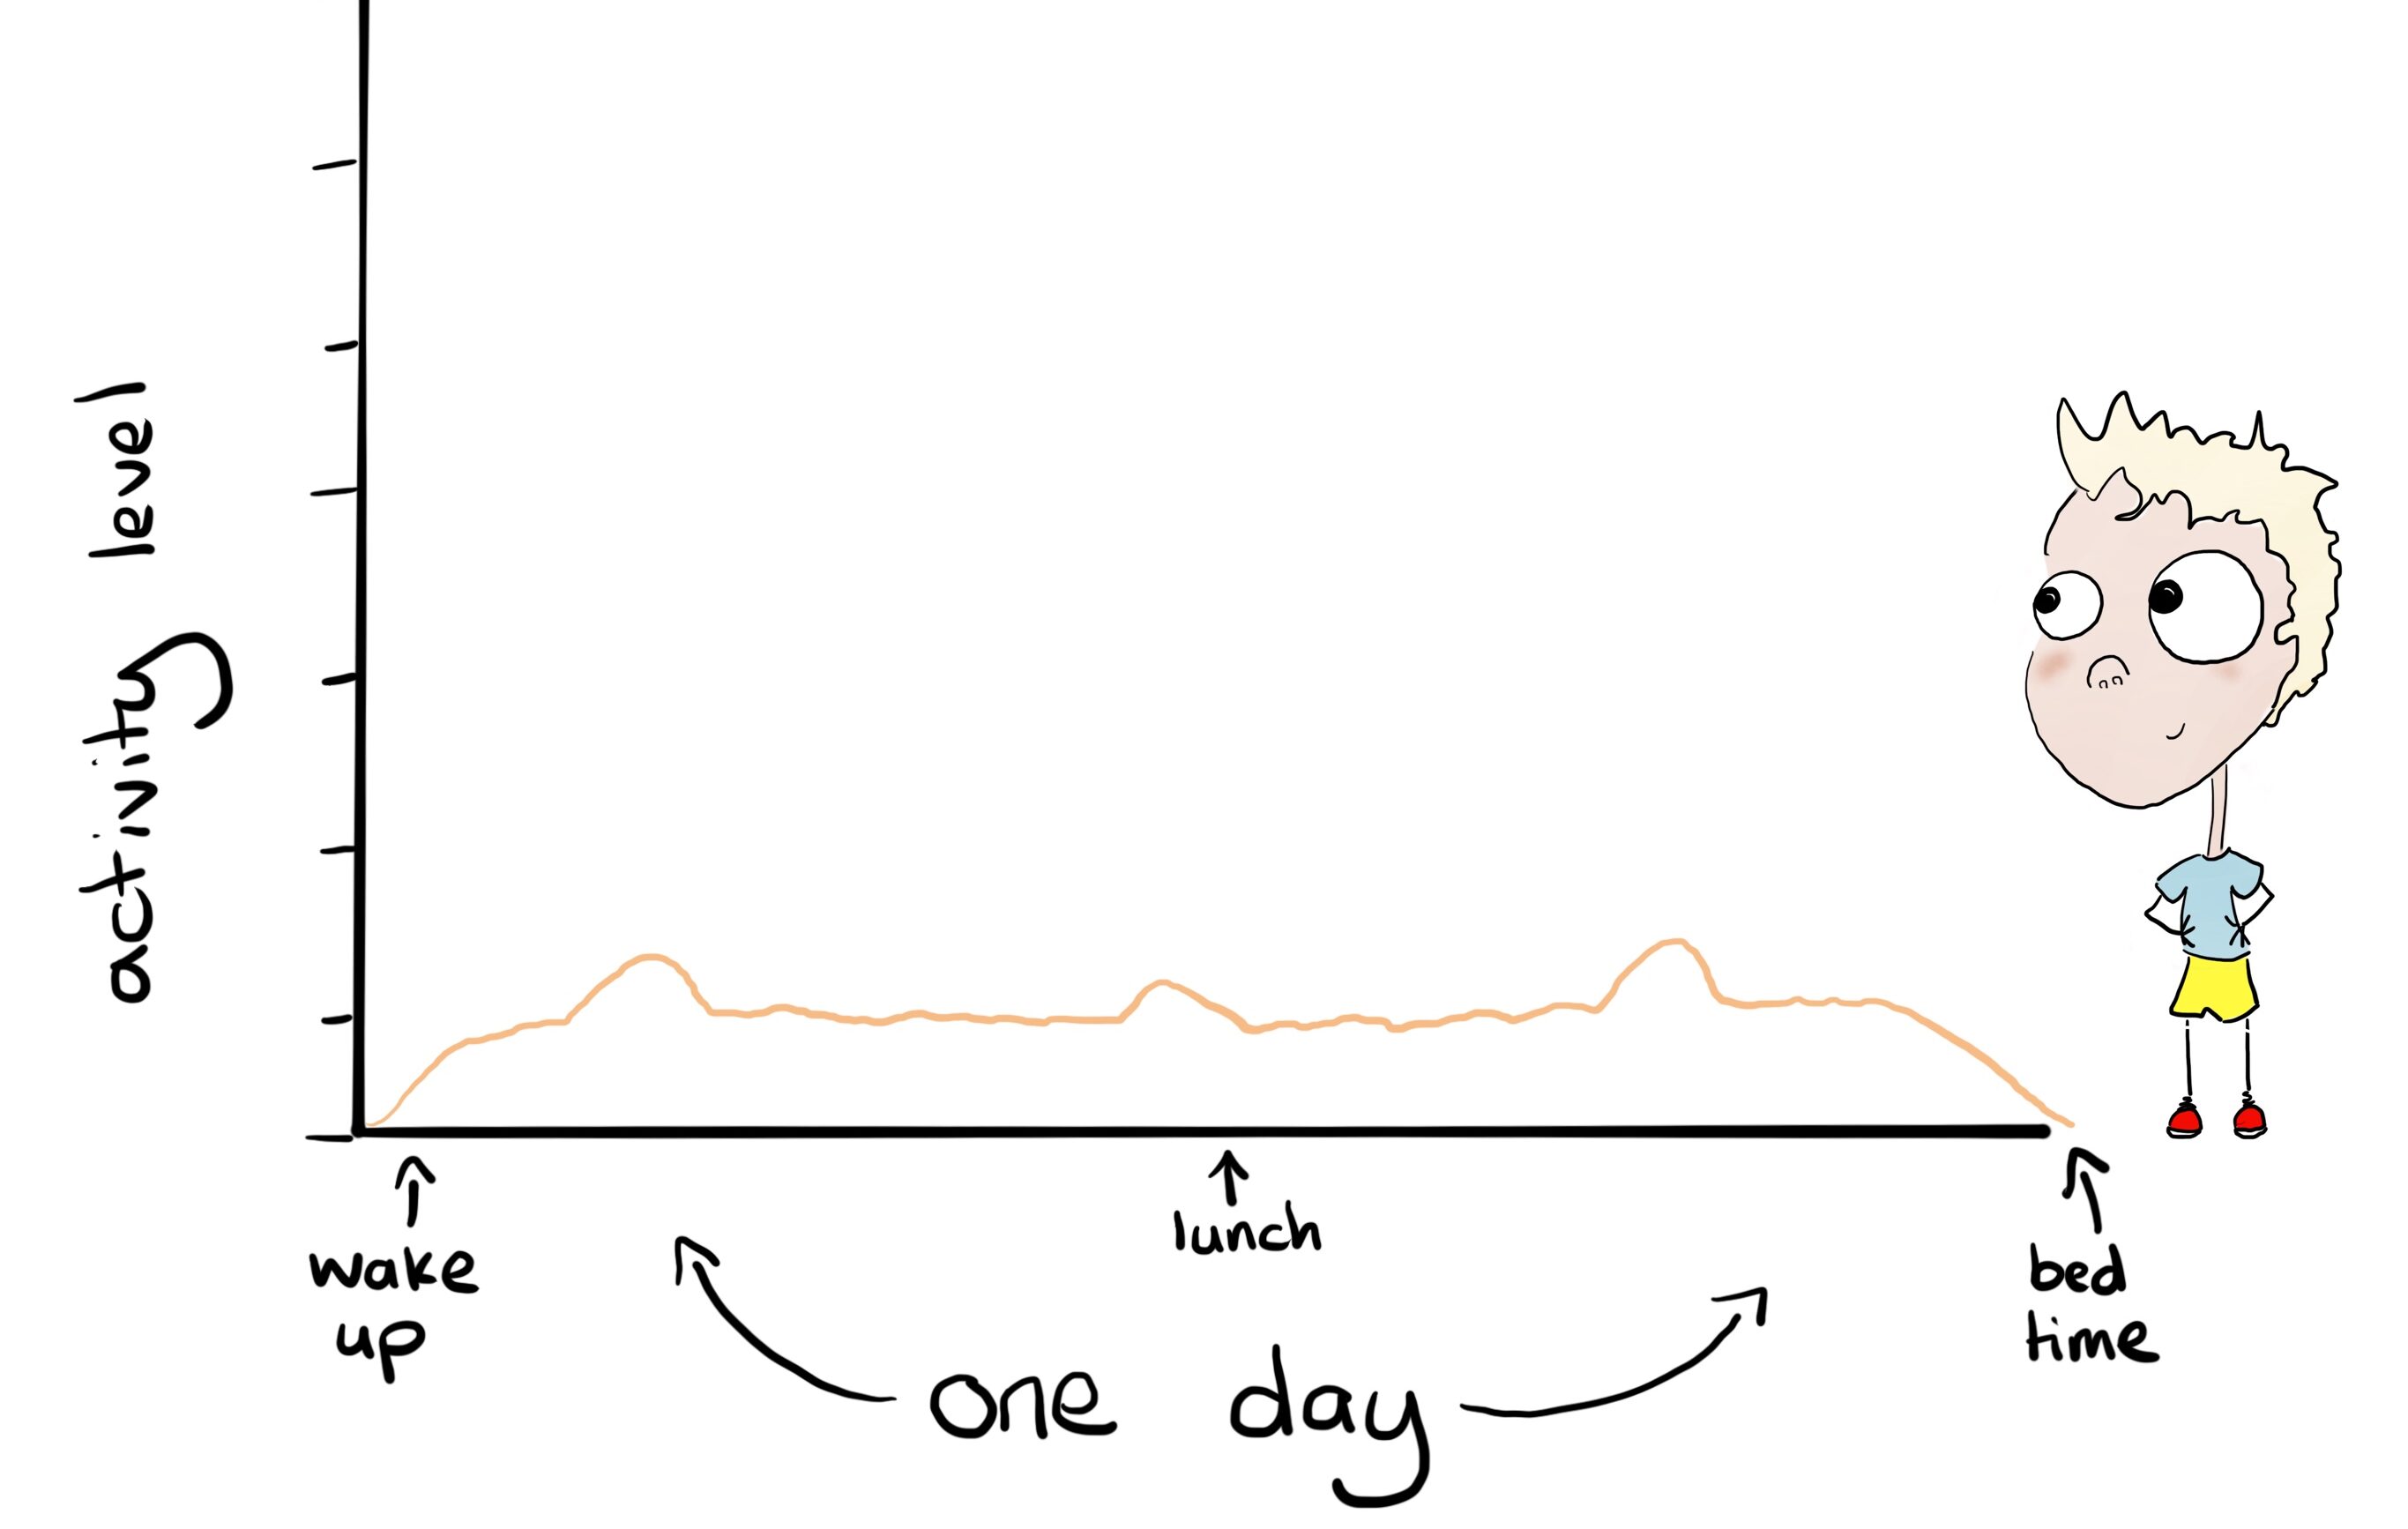 graph showing sedentary inactive lifestyle over the course of a day